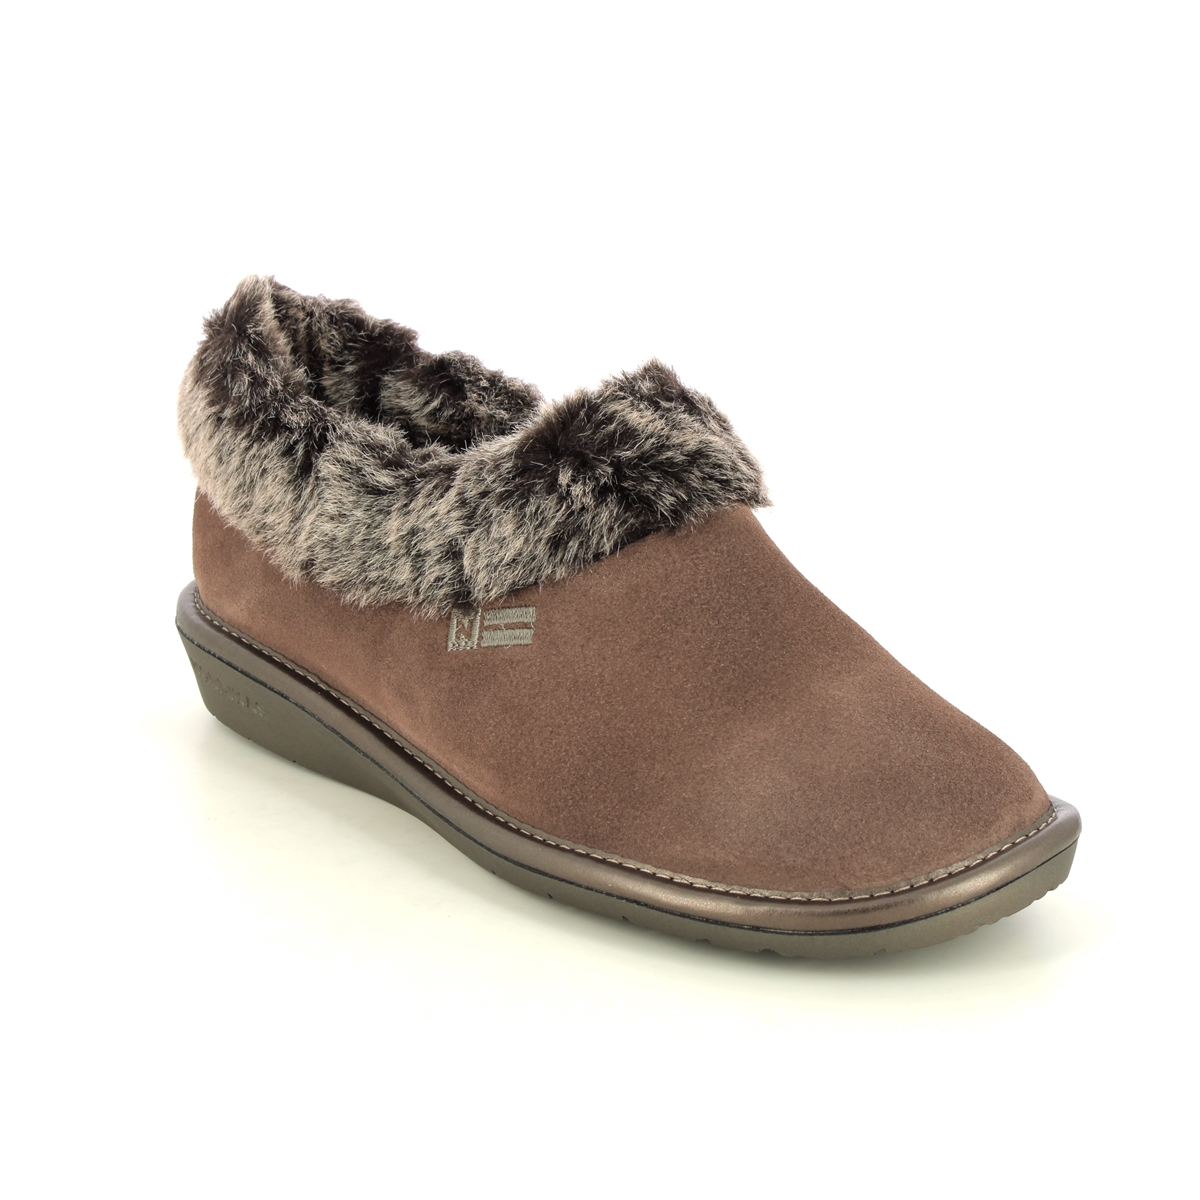 Nordikas Toasty Fur Taupe Suede Womens Slippers 1358-53 In Size 40 In Plain Taupe Suede